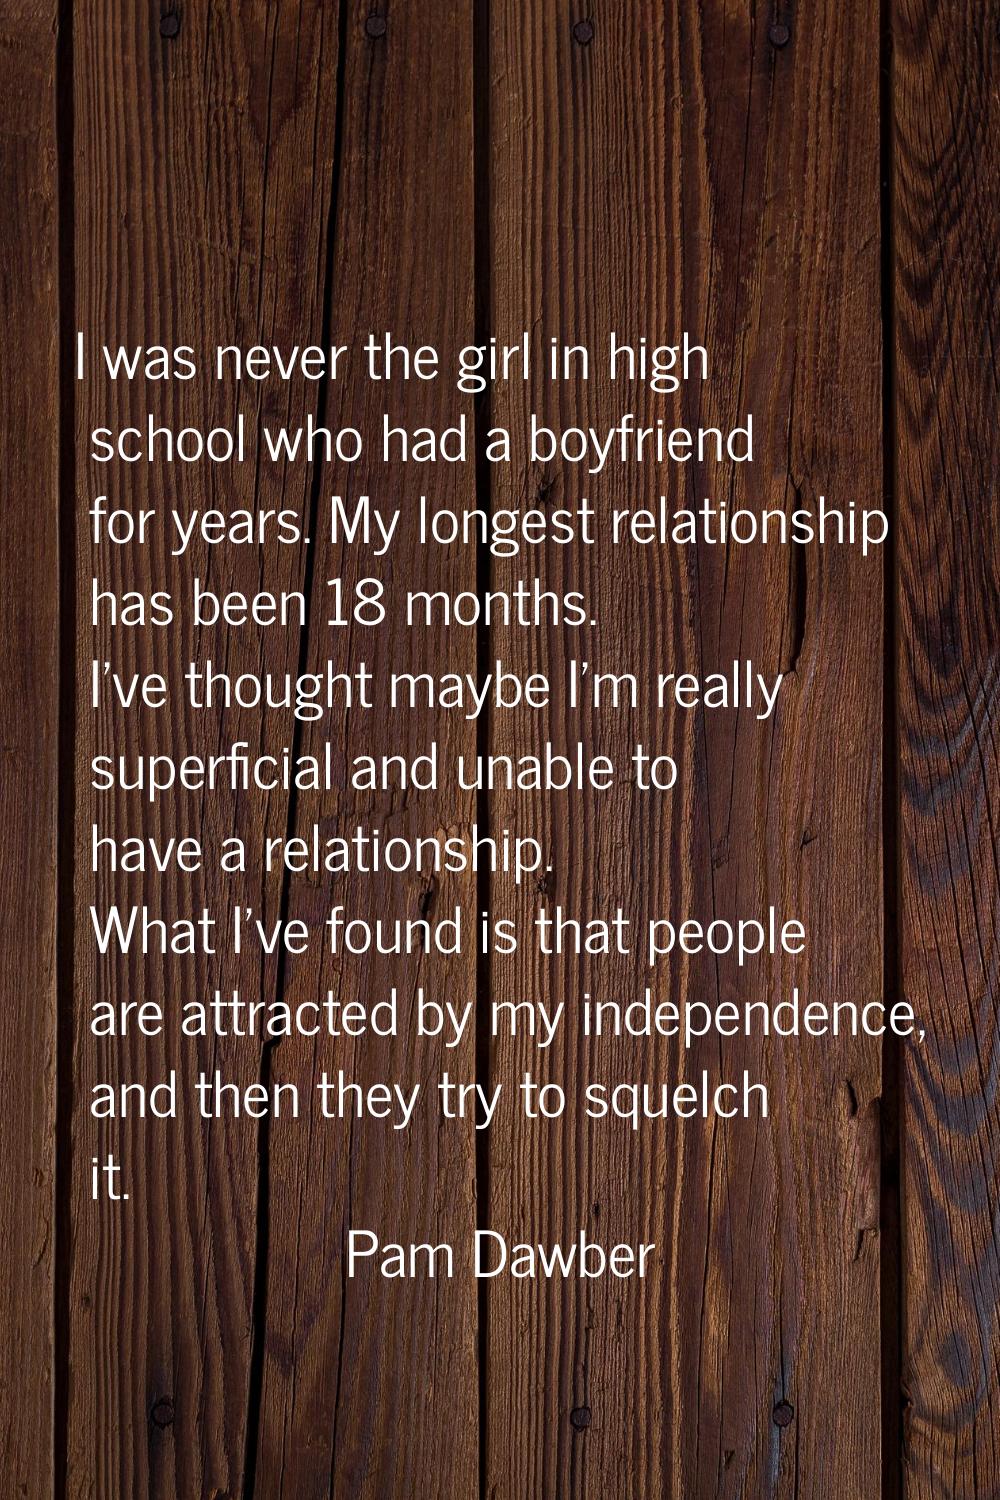 I was never the girl in high school who had a boyfriend for years. My longest relationship has been